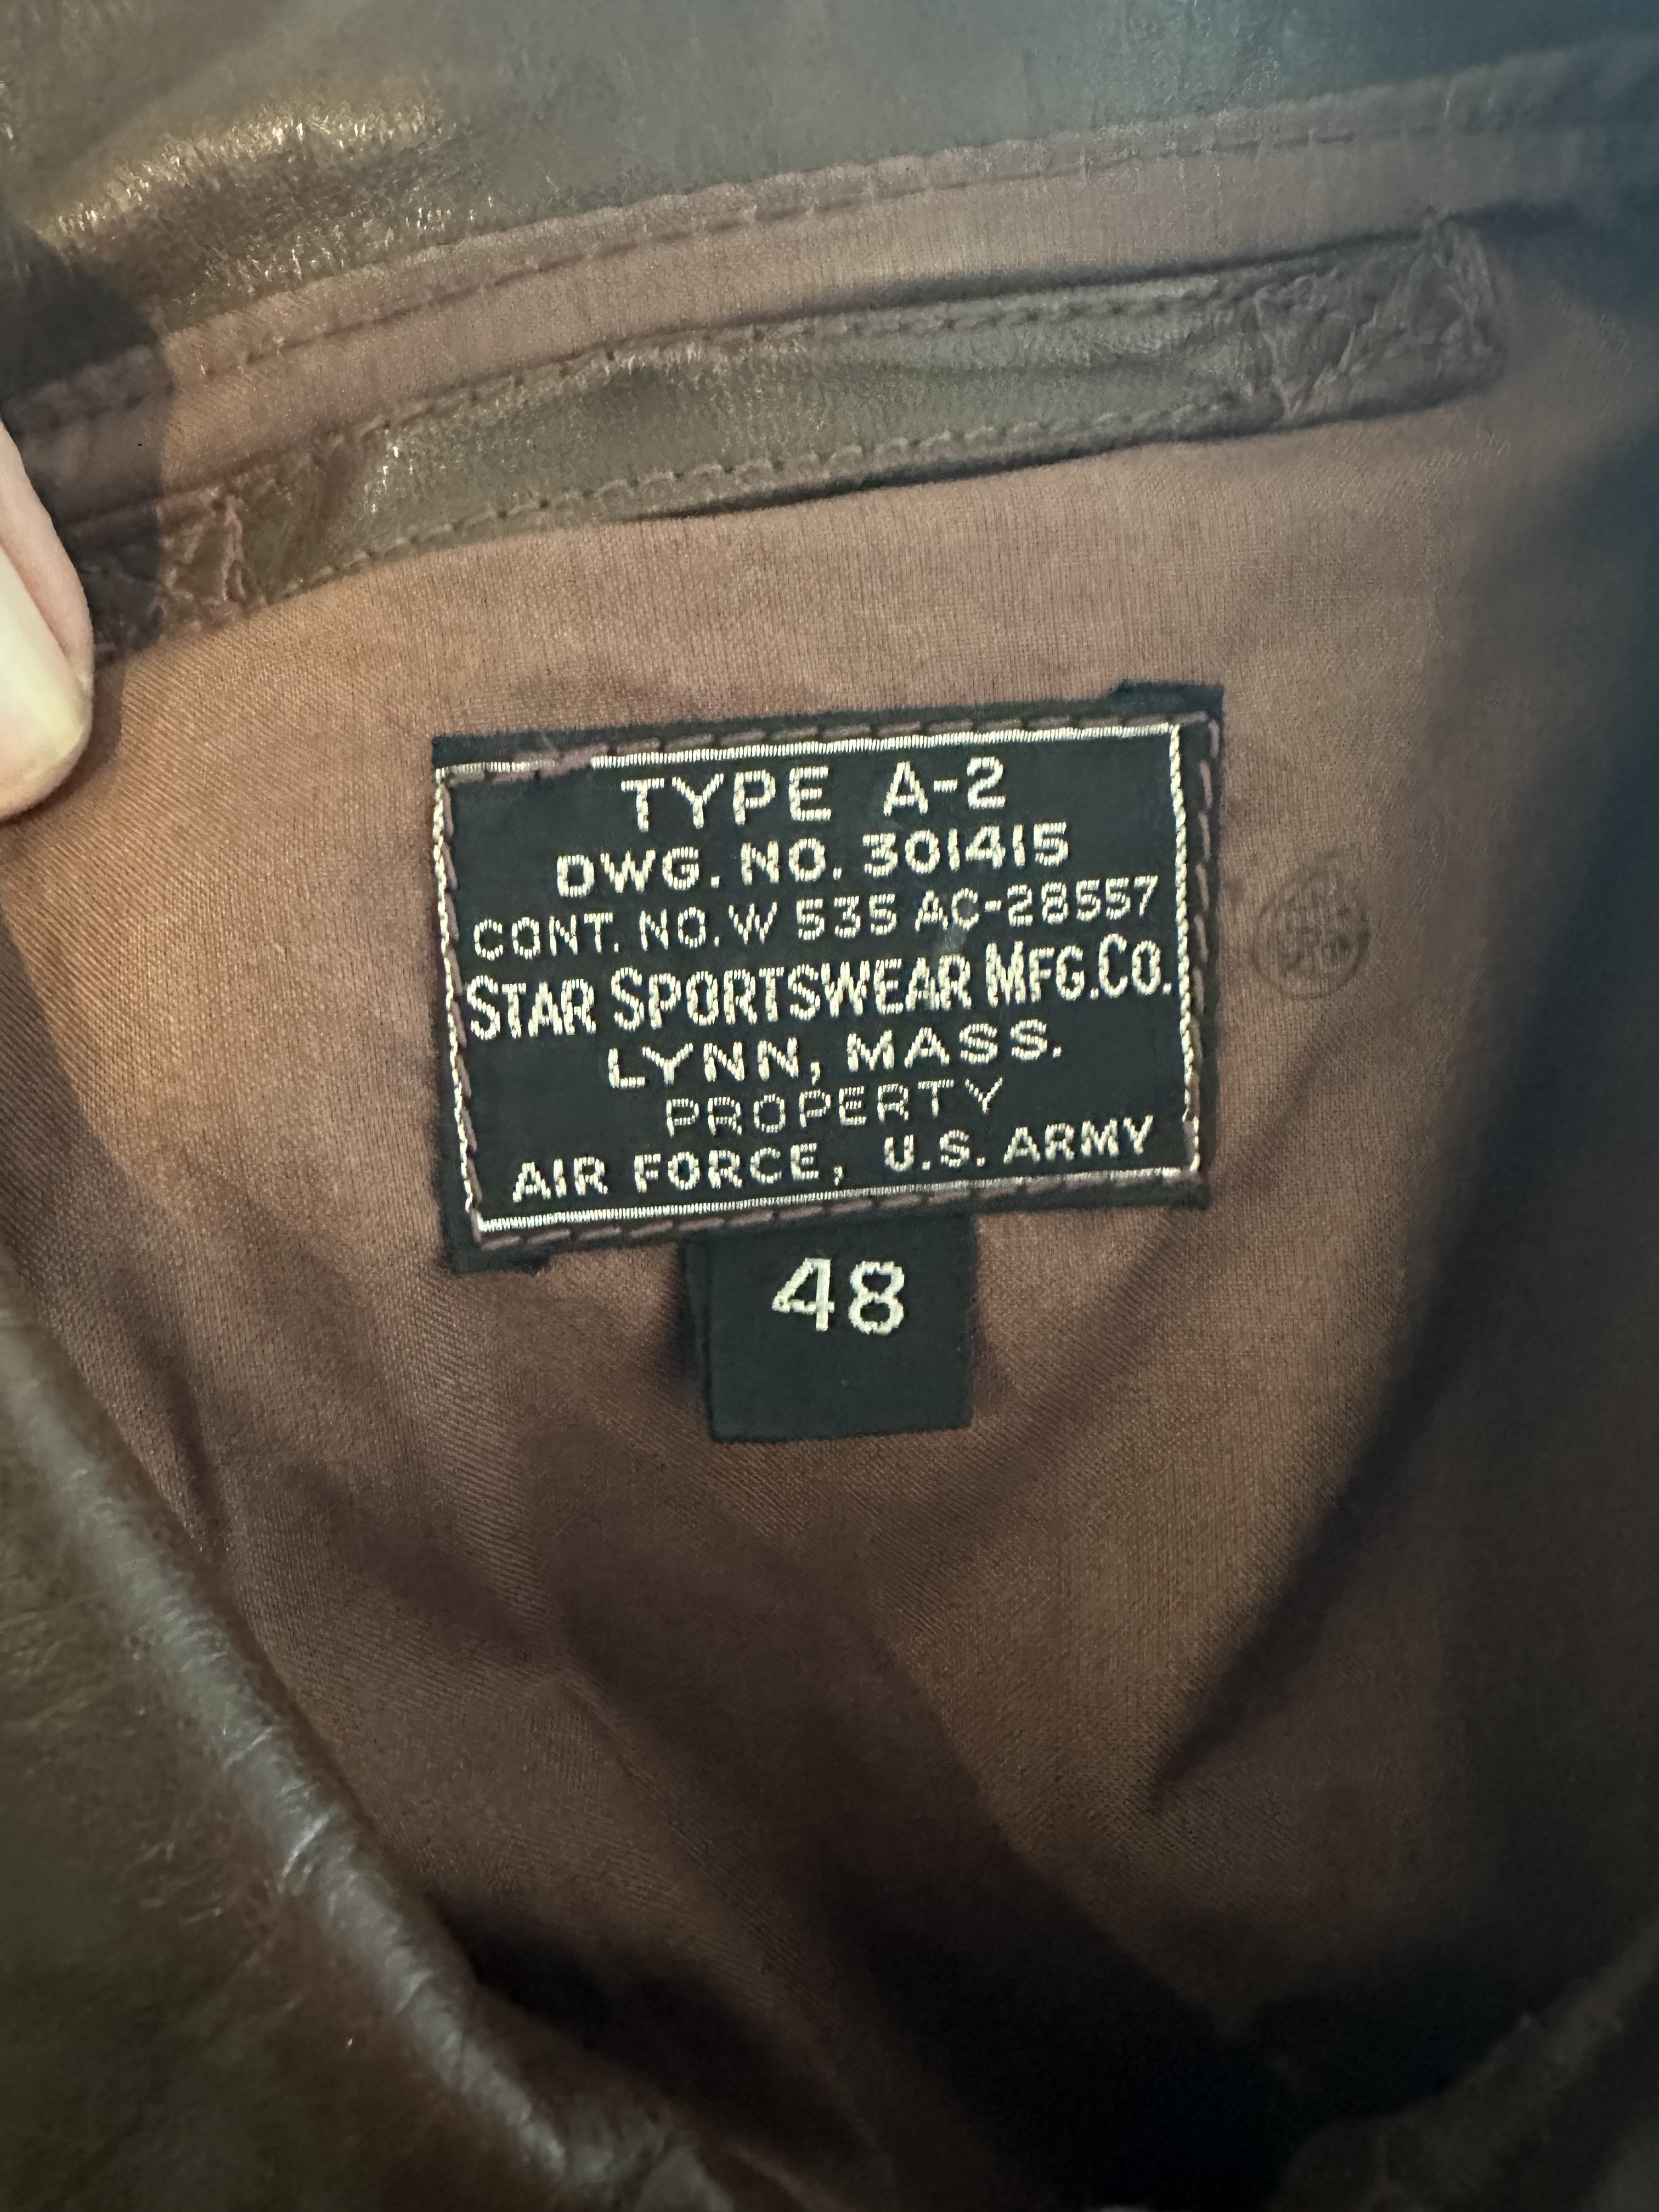 It’s Time To Get Back To Our Roots. | Vintage Leather Jackets Forum